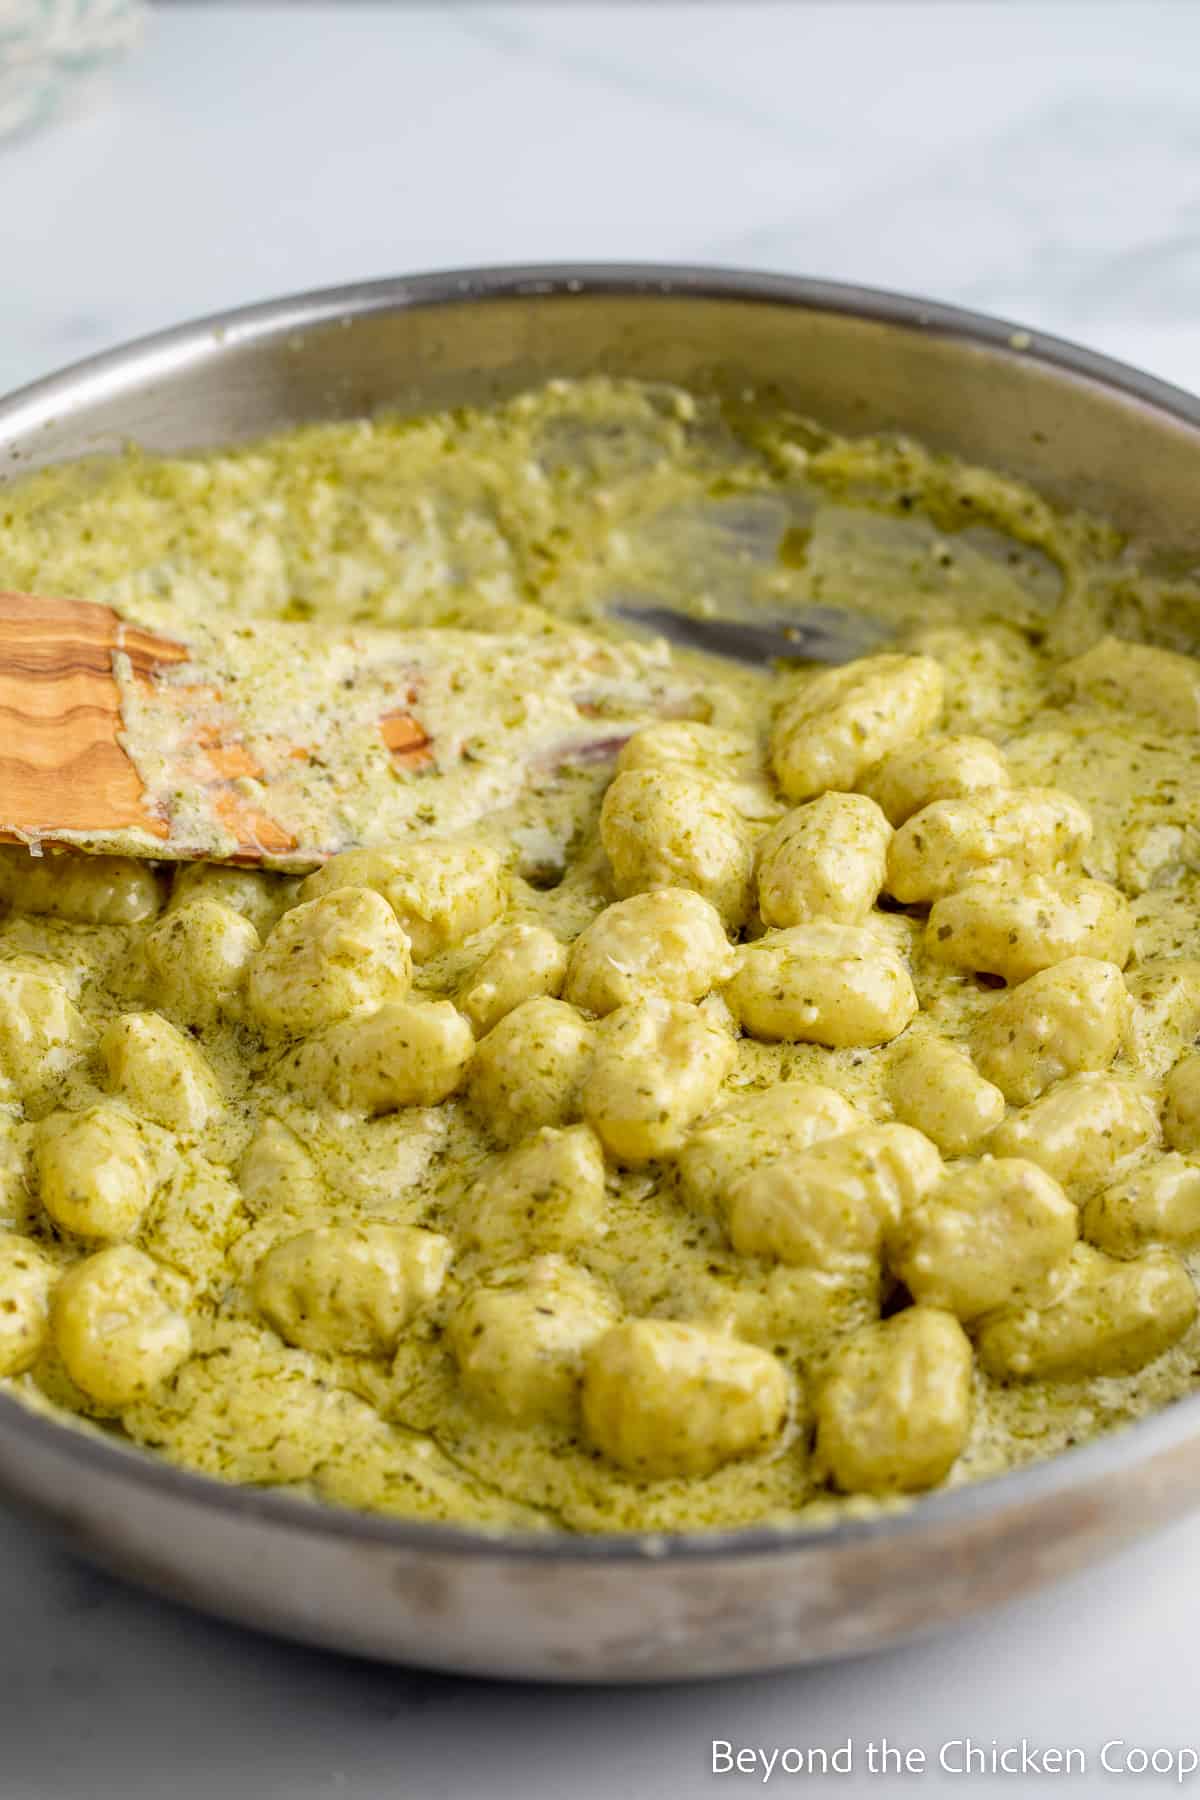 Gnocchi with pesto in a large saute pan.